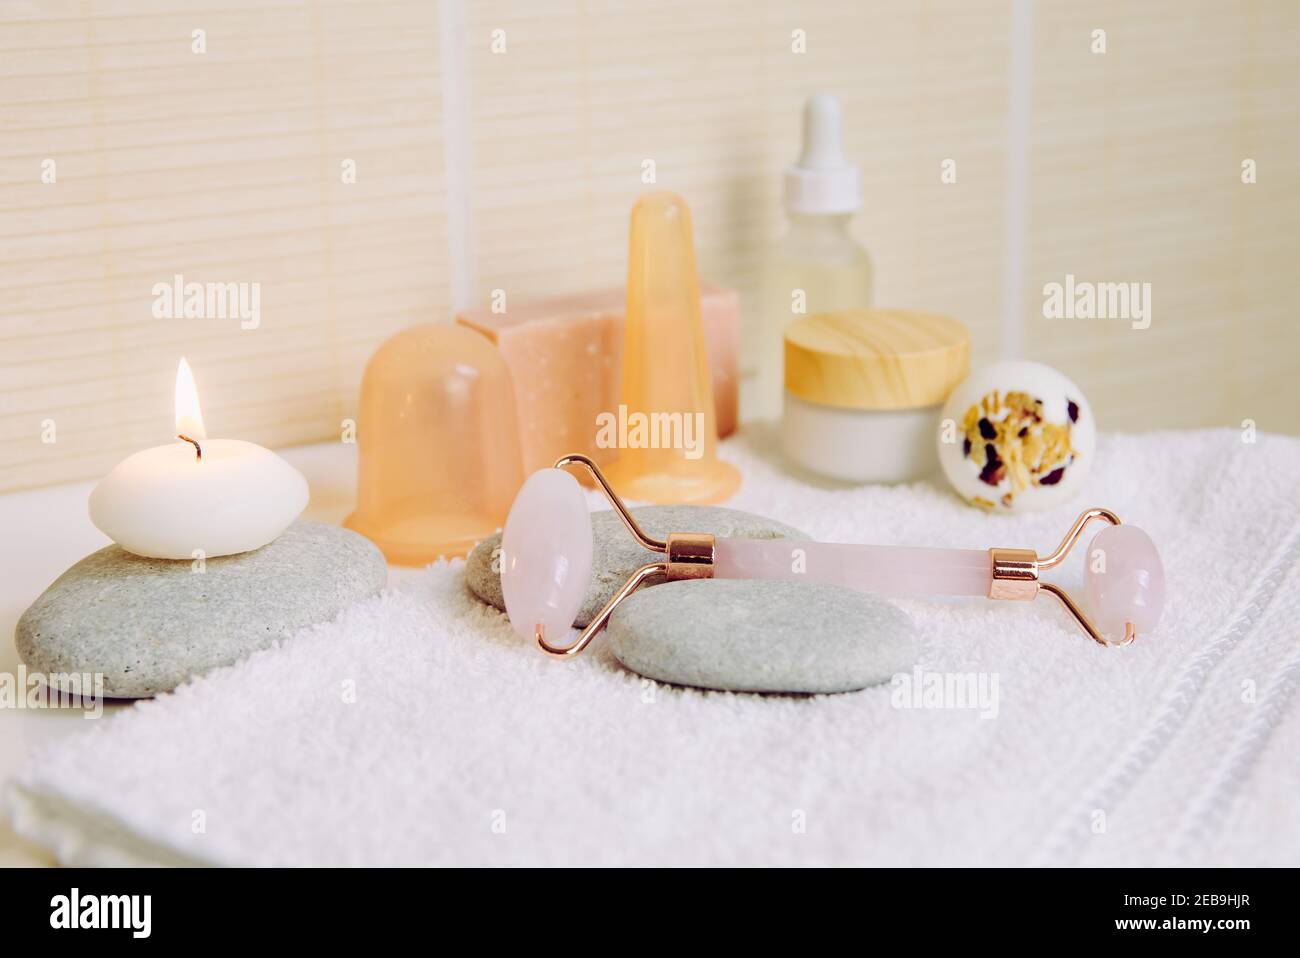 Cozy home spa and self care concept. Various spa tools in home bathroom: rose quartz face rolling tool, facial and body silicone cupping tools. Stock Photo